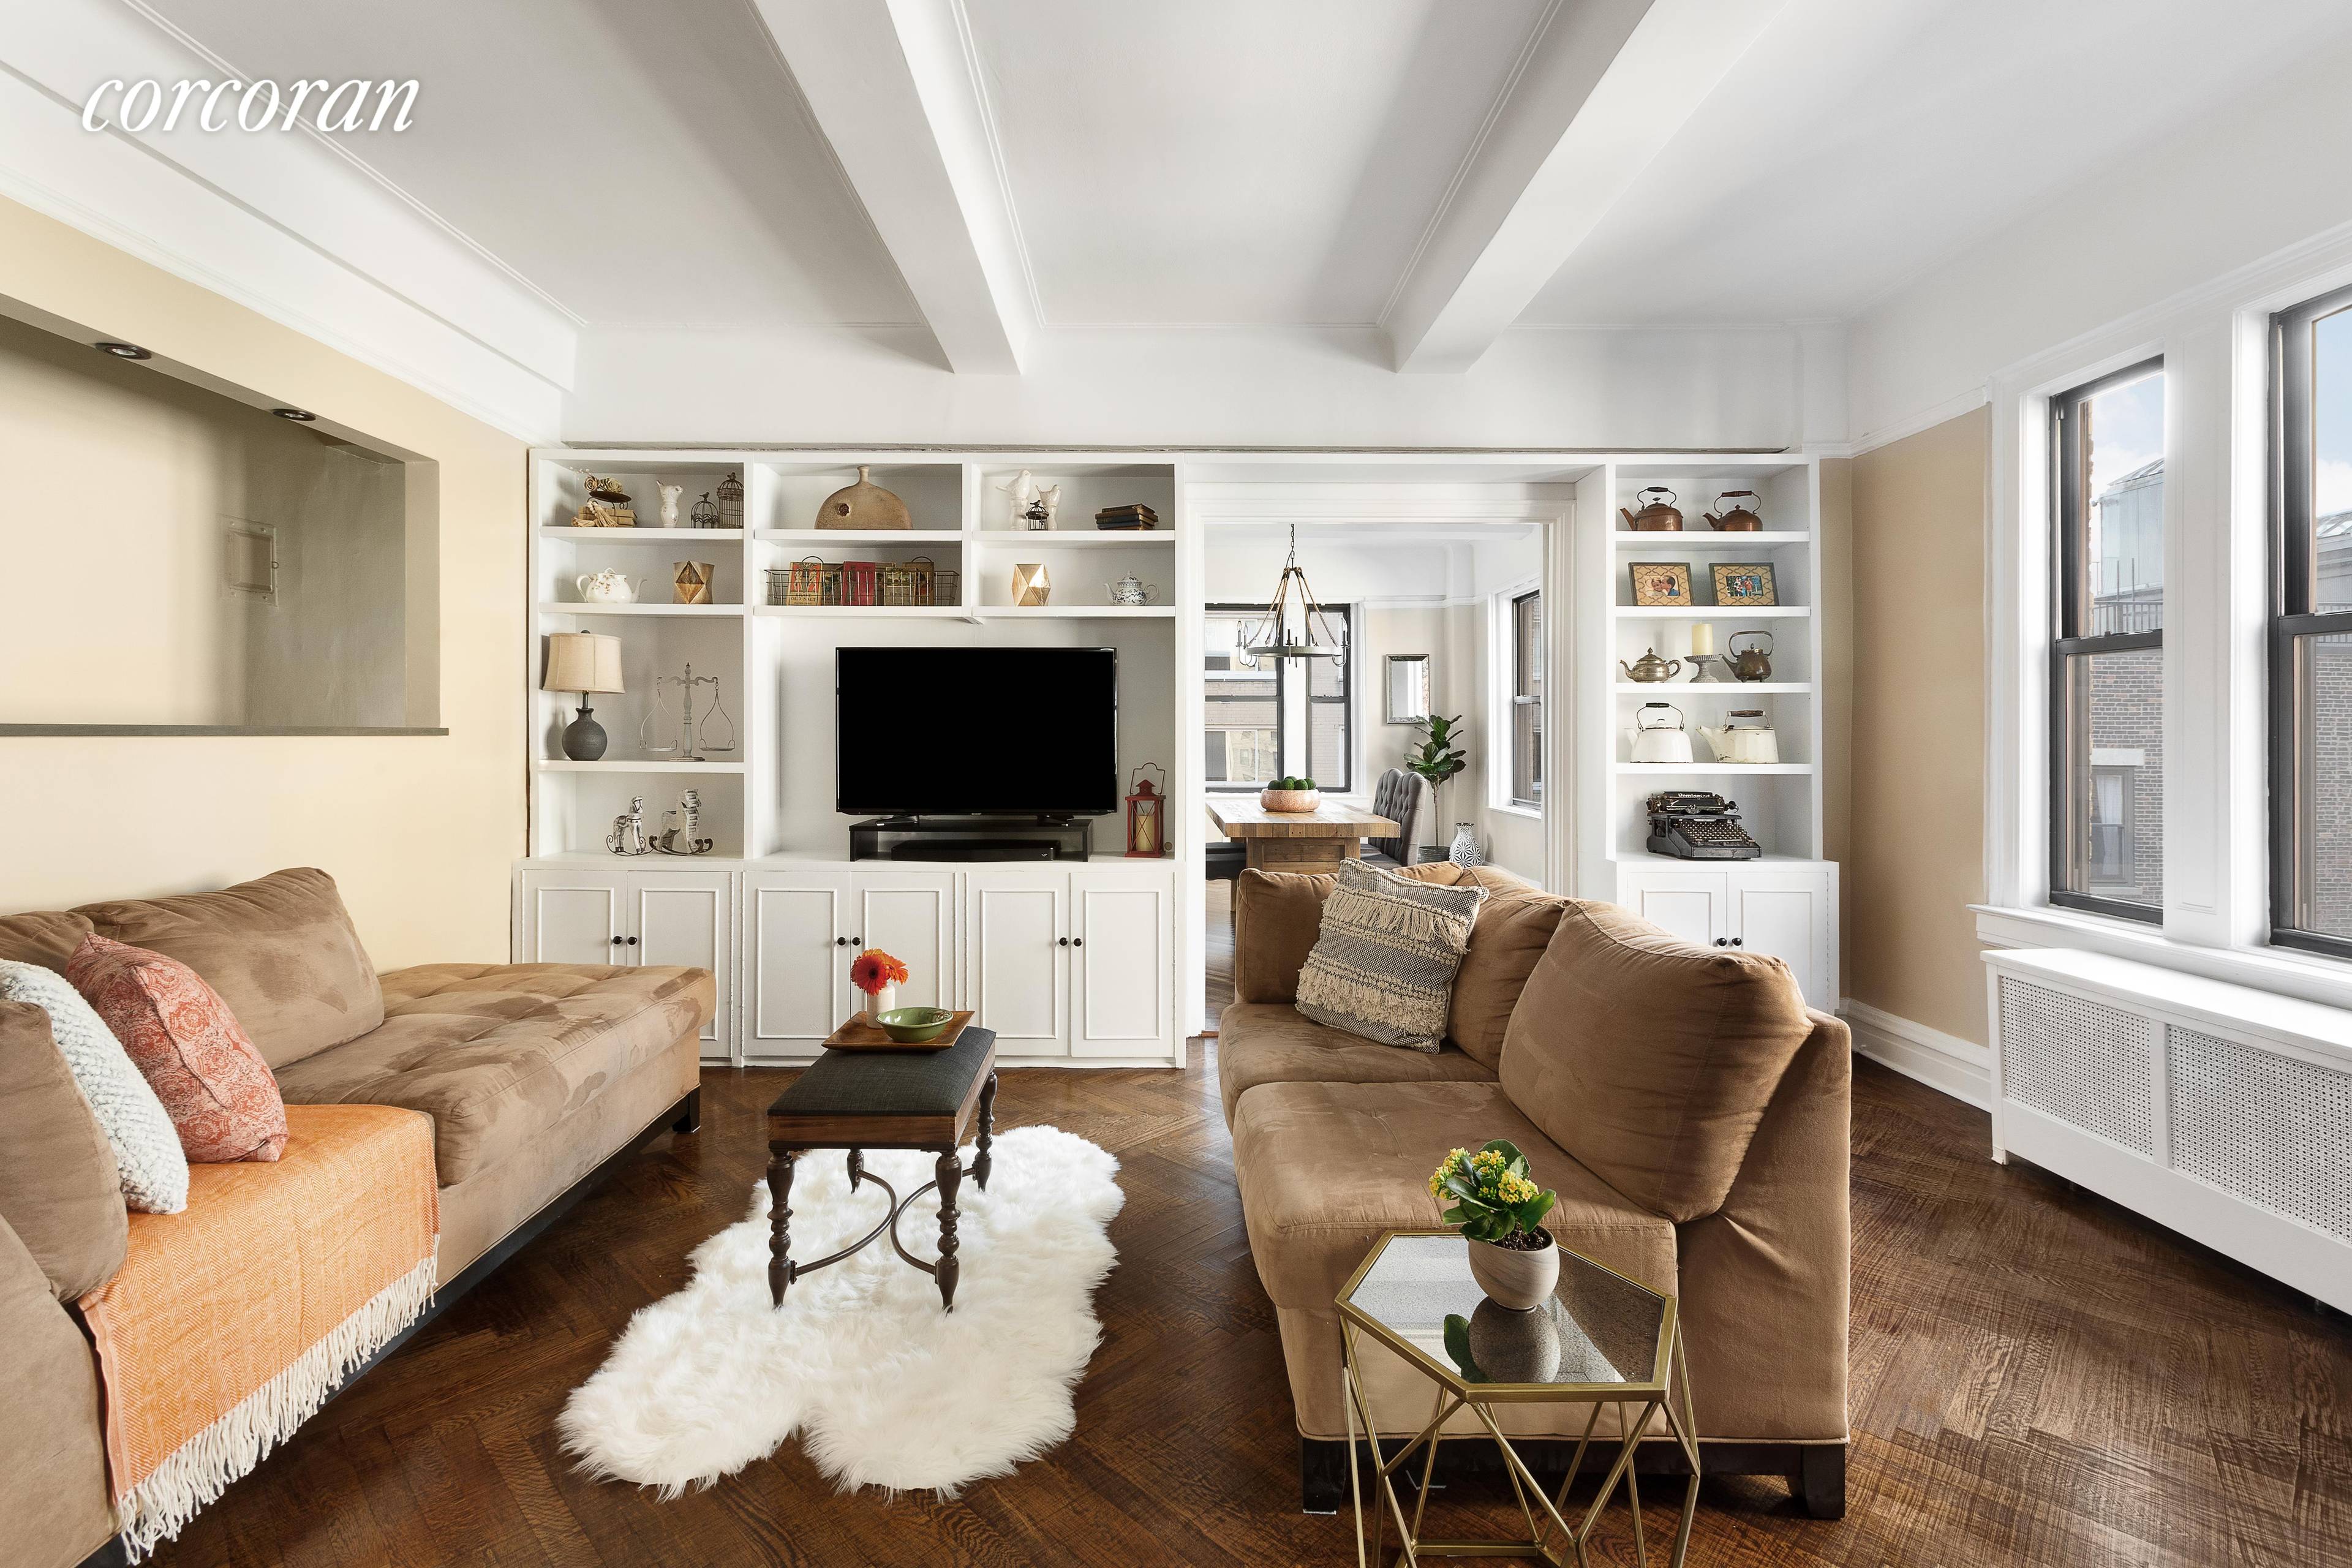 A complete renovation mixed with classic pre war elegance combine to create this sunny and spacious 2 bedroom, 2 bathroom home in a prime Upper West Side location.